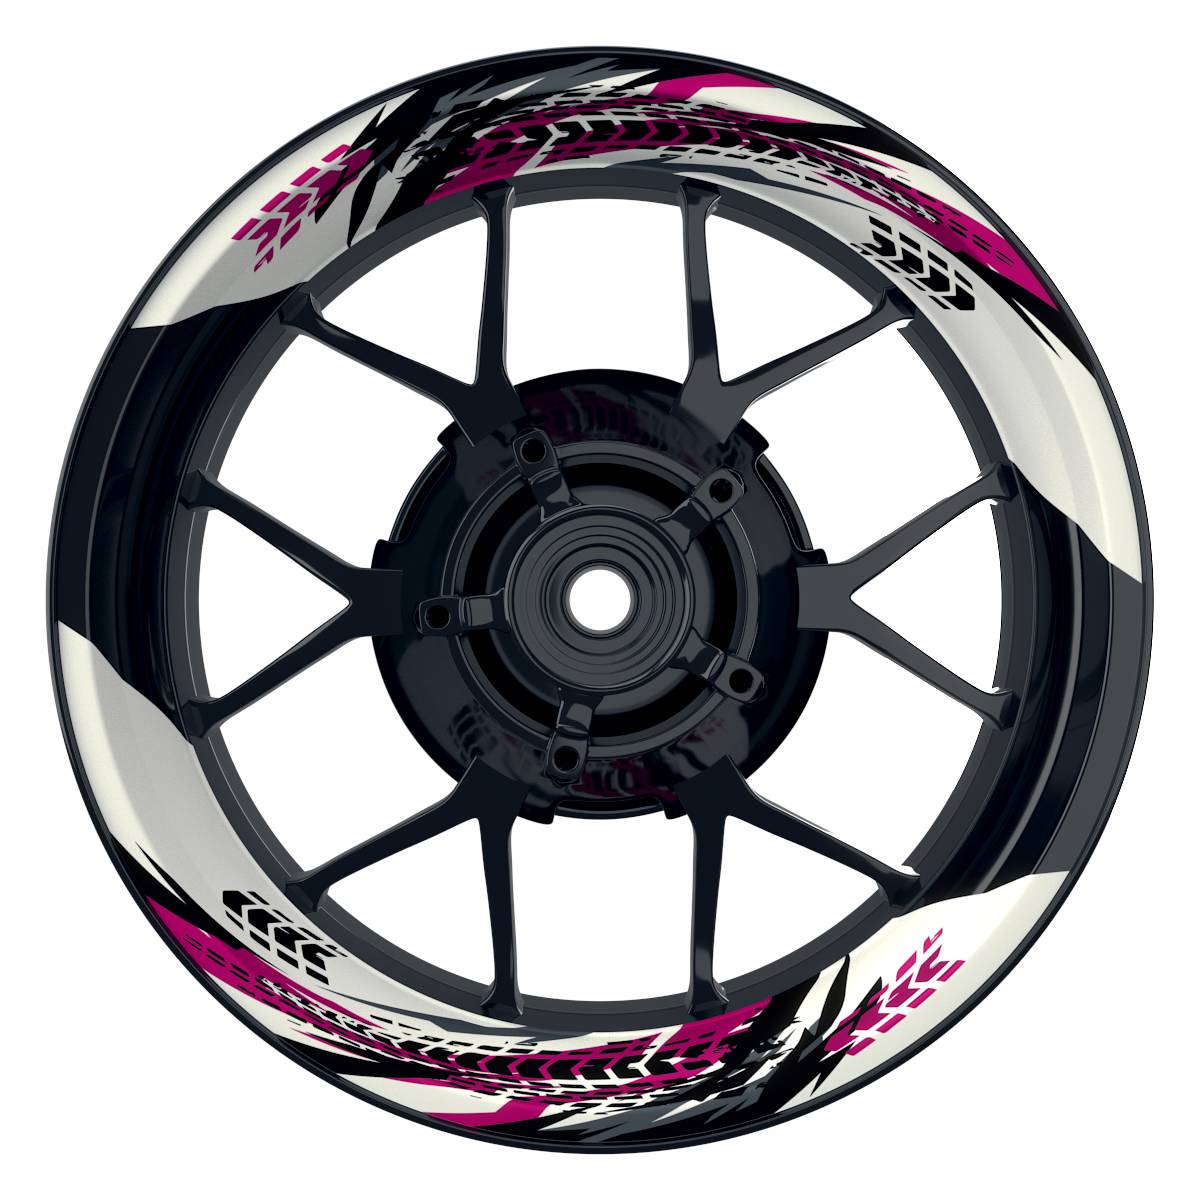 Tires weiss pink Frontansicht